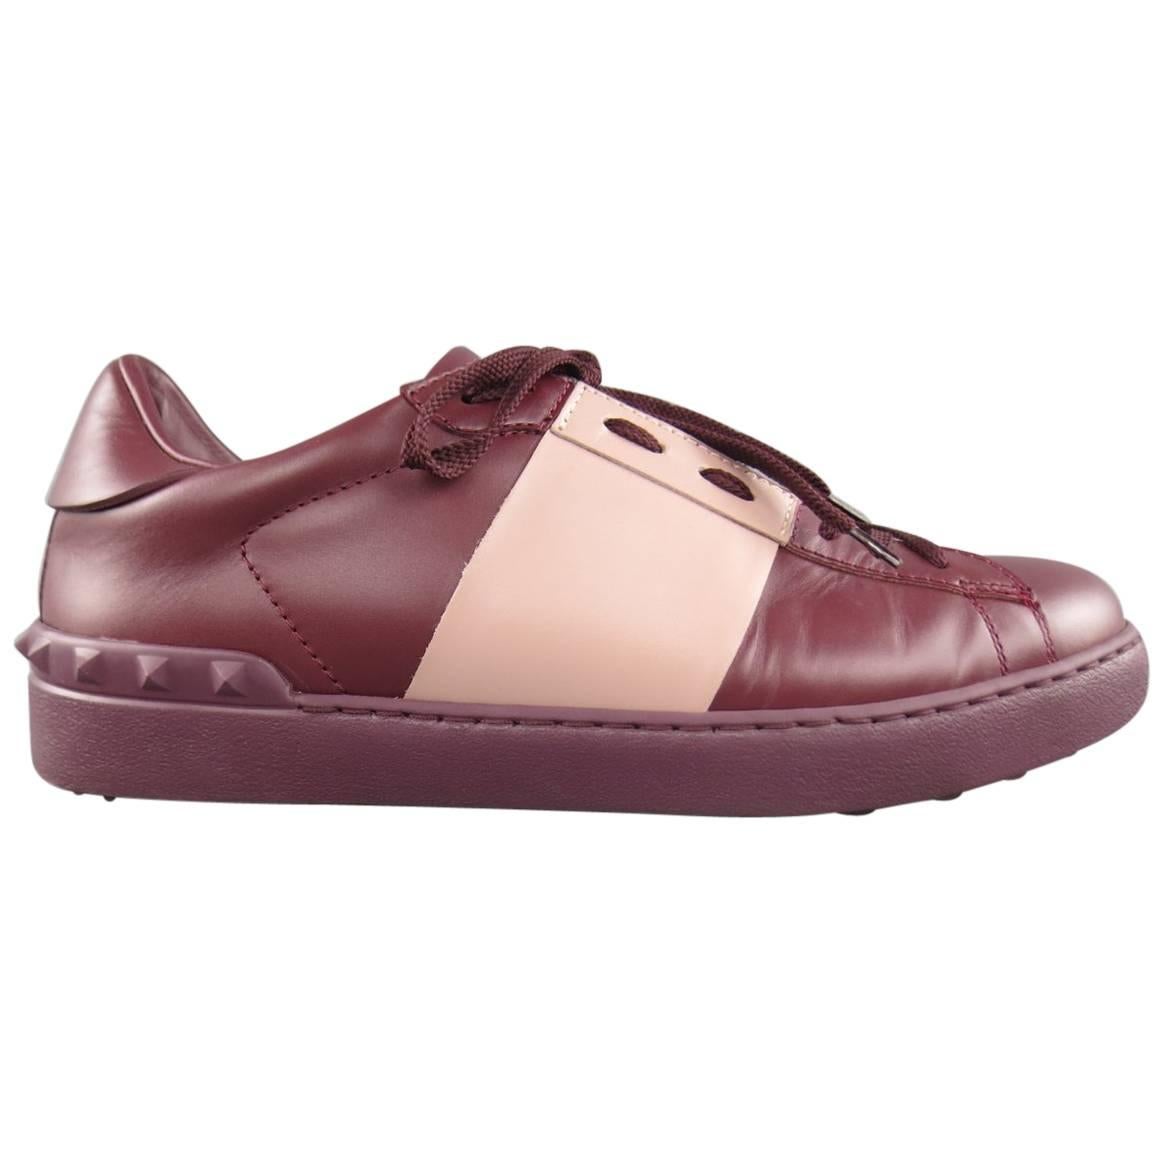 Men's VALENTINO Size 7.5 Burgundy & Mauve Two Toned Leather Rockstud Sneakers